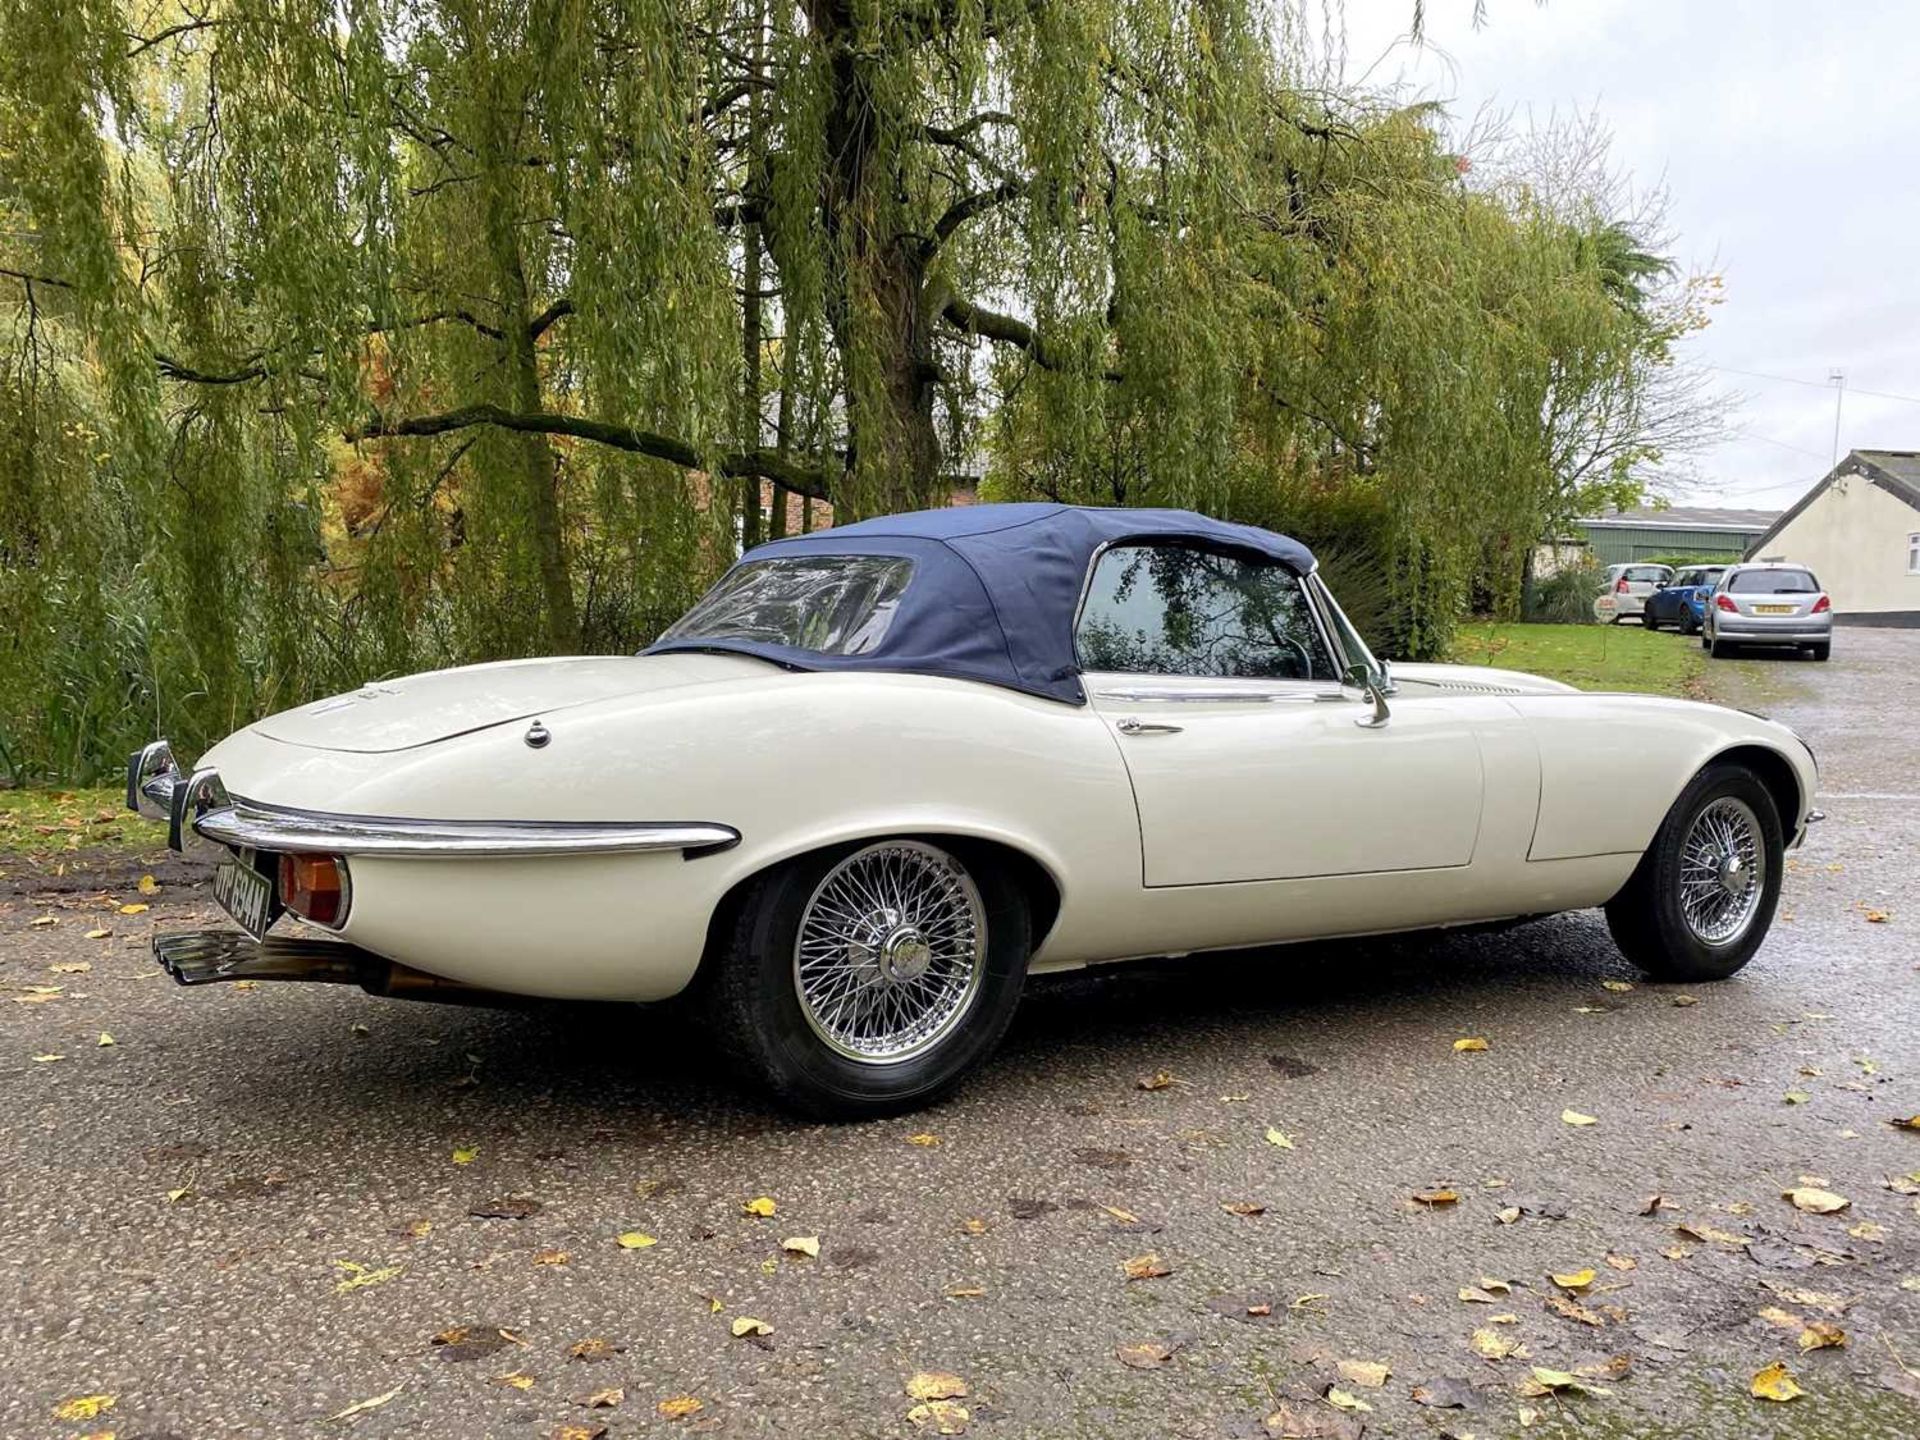 1973 Jaguar E-Type V12 Roadster As seen in Only Fools and Horses - Image 44 of 105